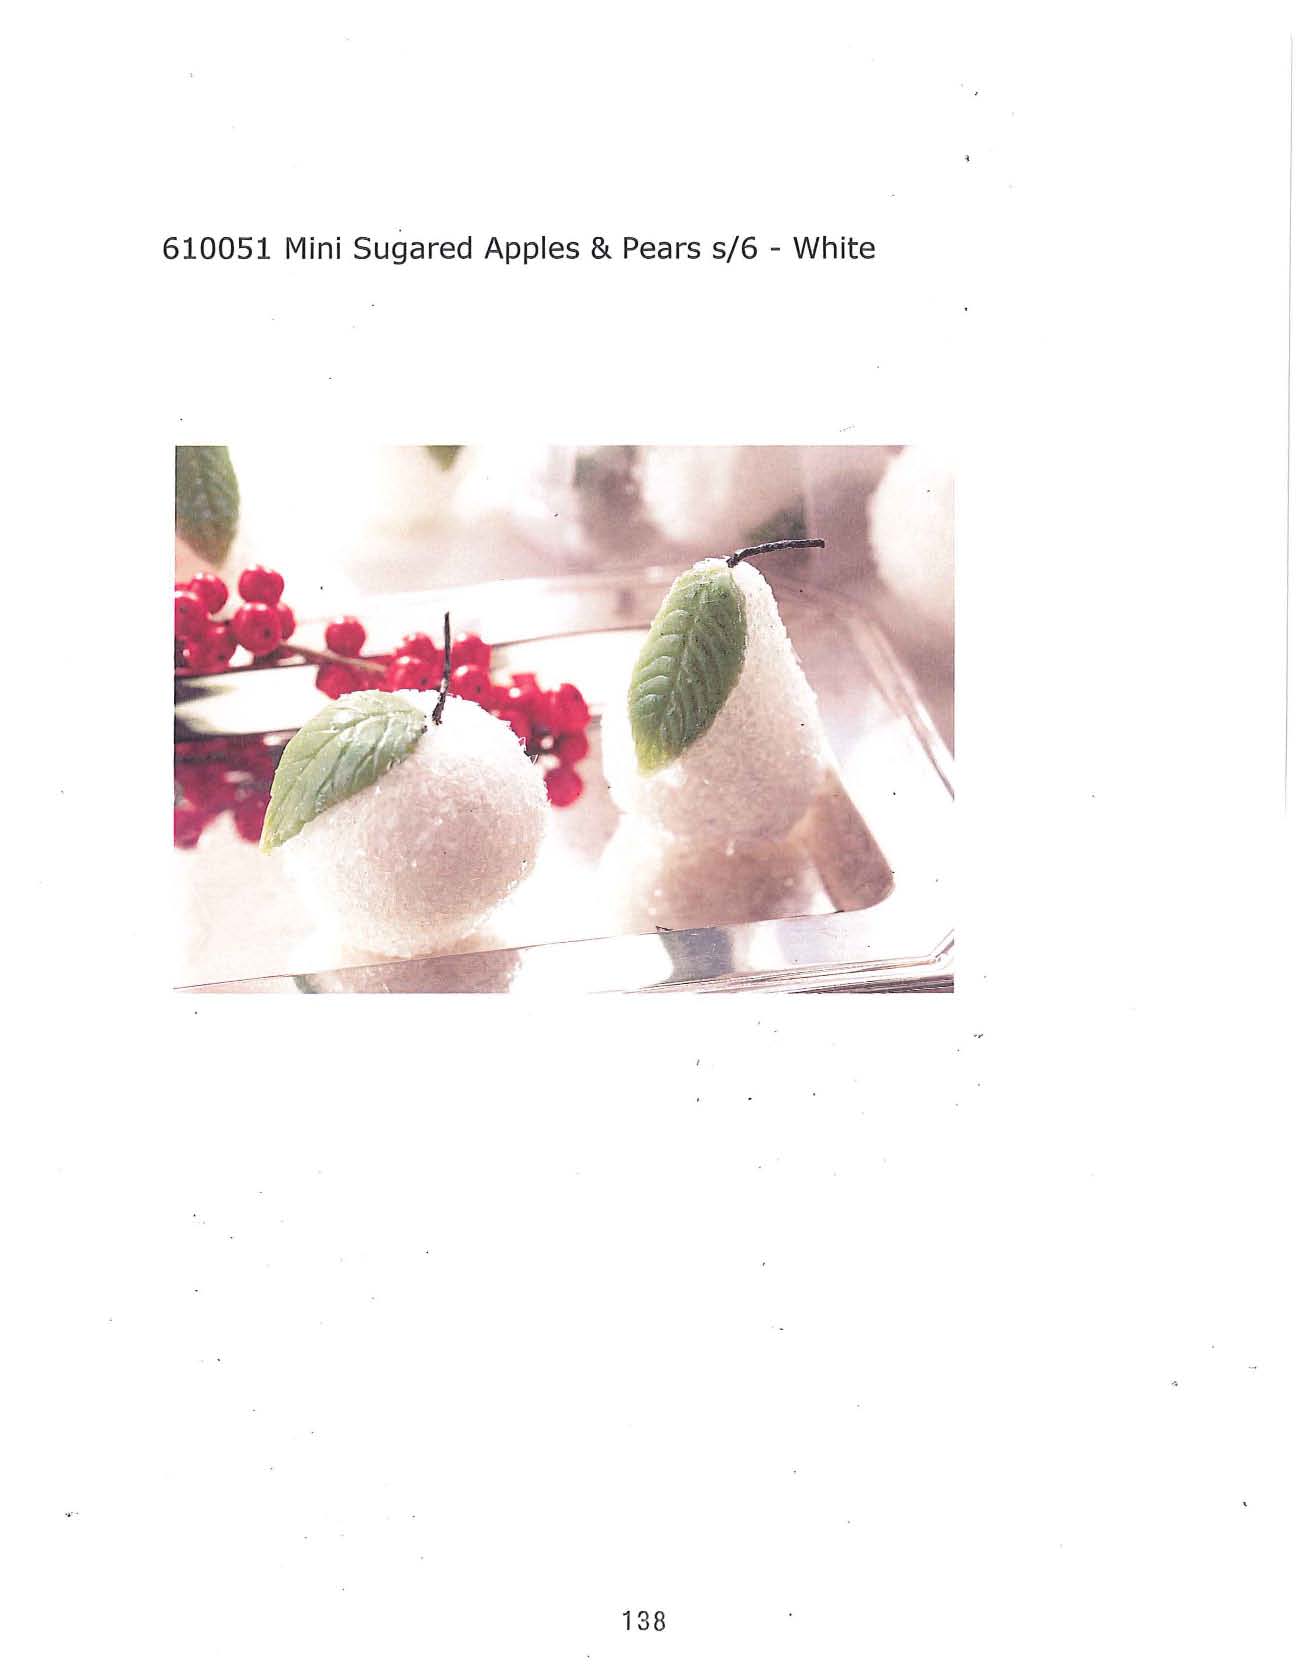 Mini Sugared Apples & Pears Candle s/6 - White